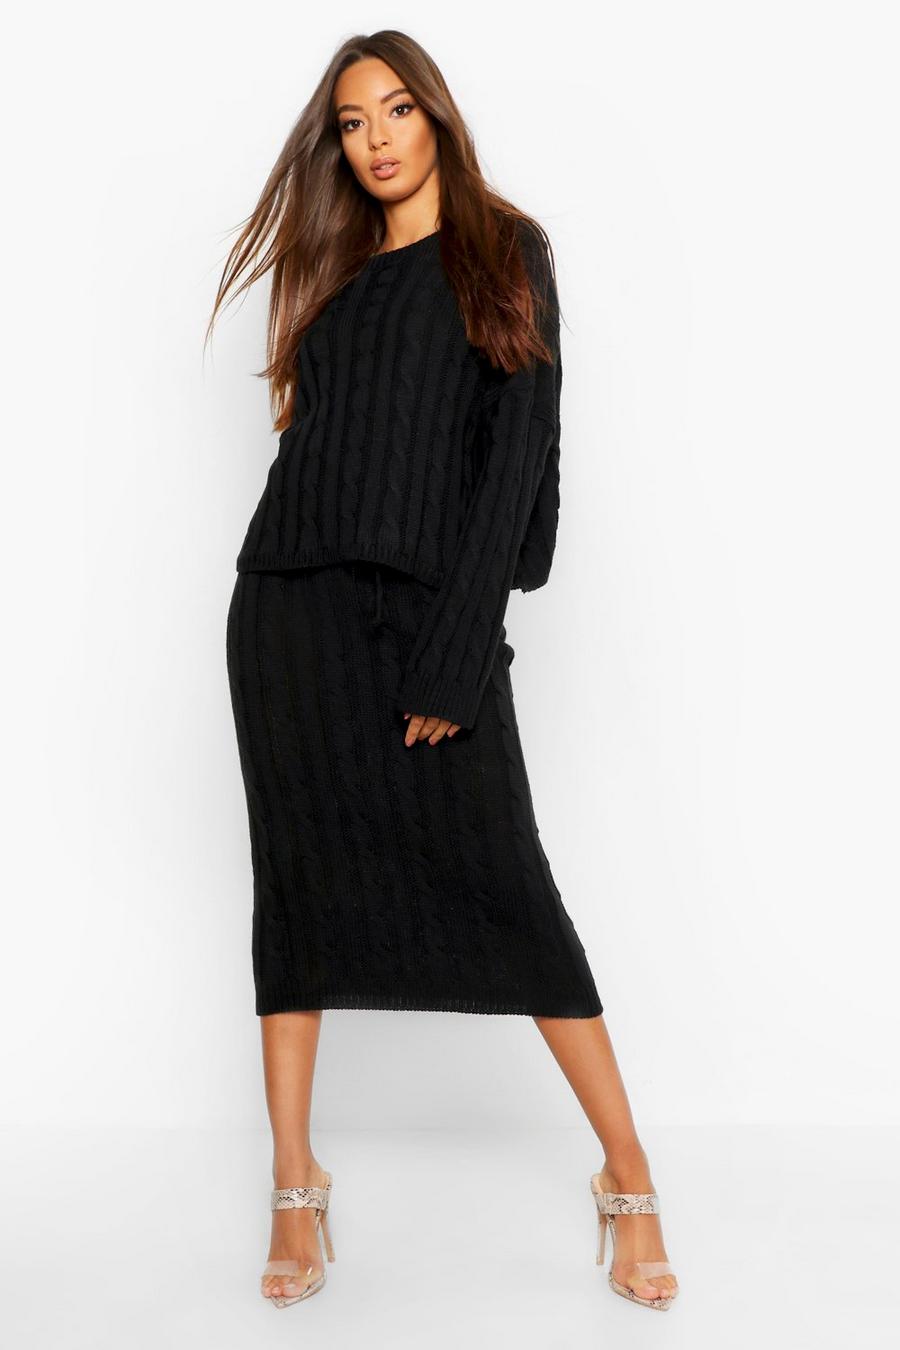 Black Cable Knit Jumper And Skirt Set